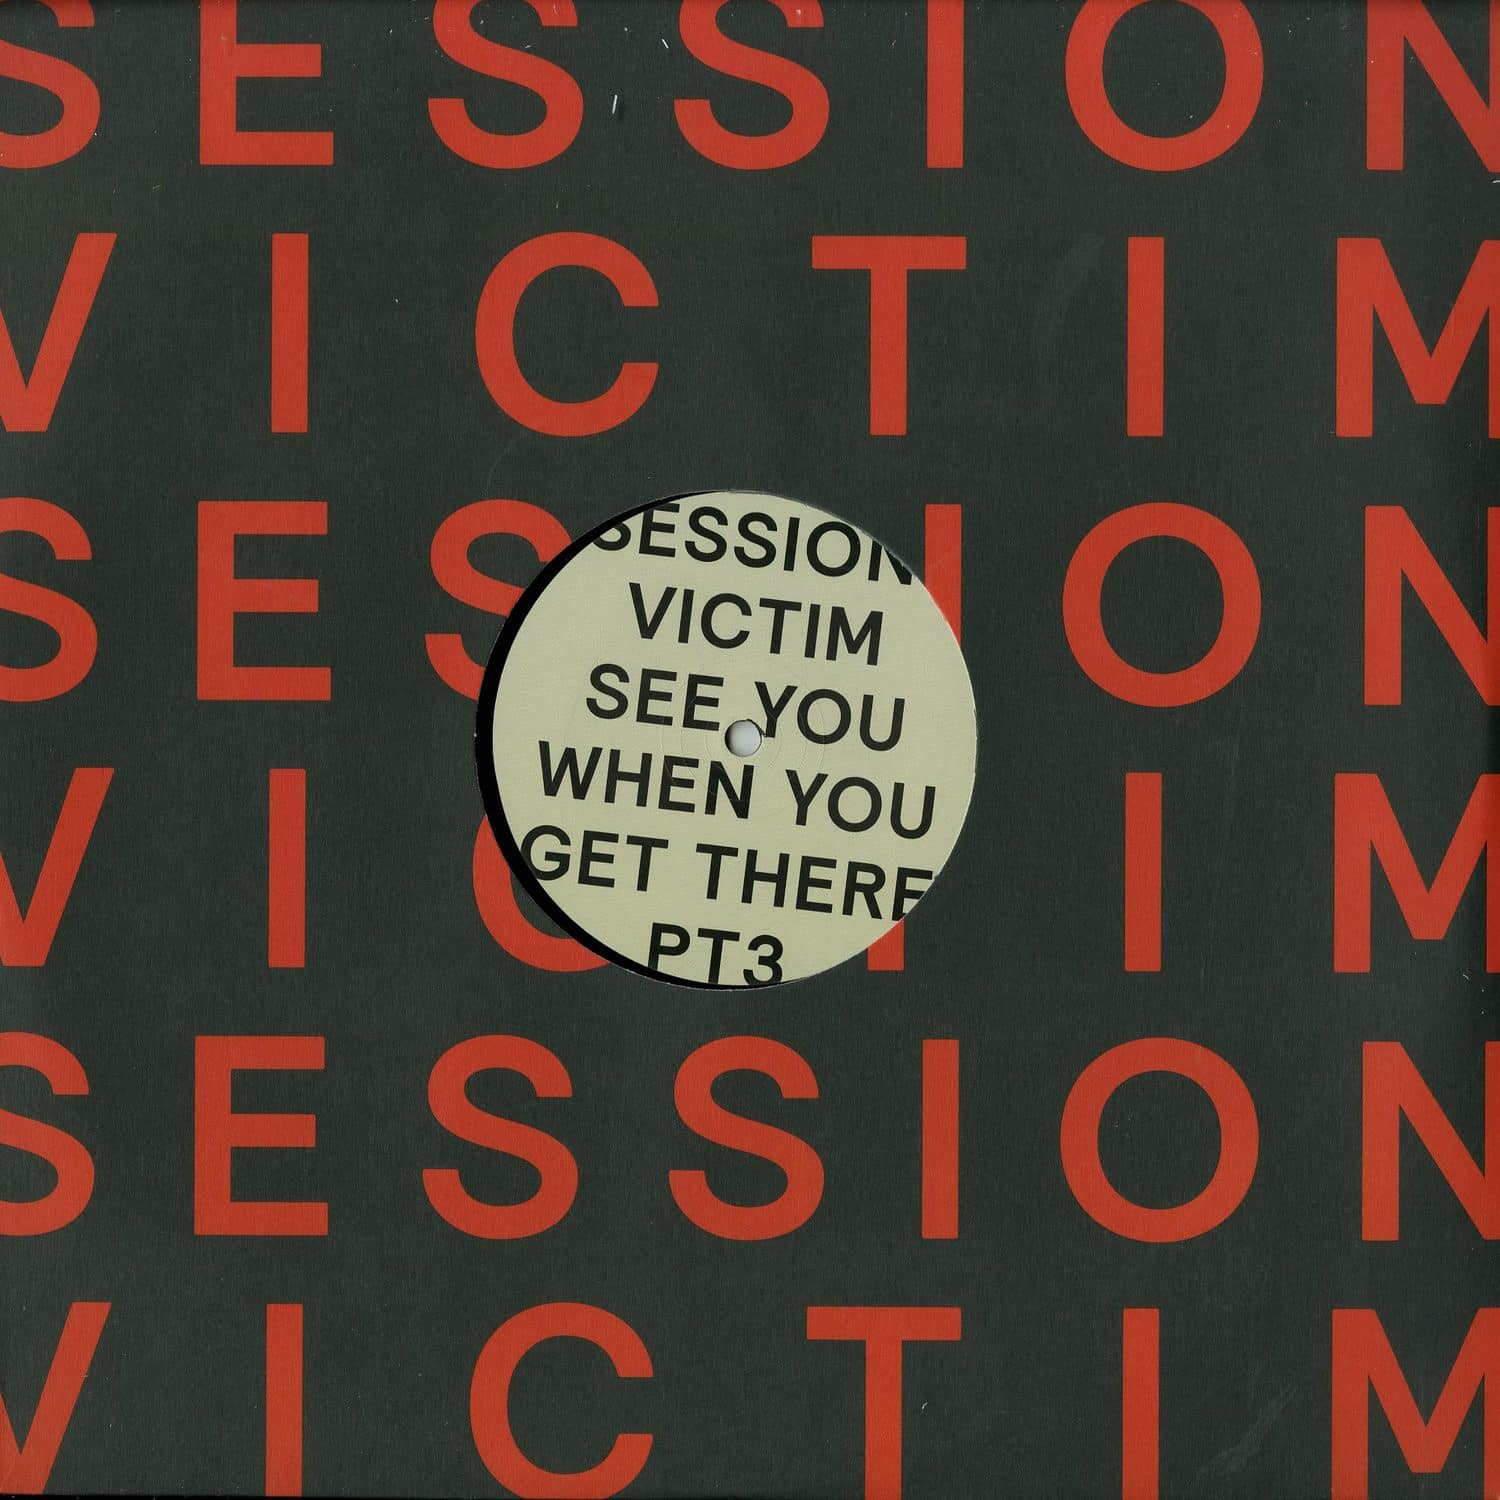 Session Victim - SEE YOU WHEN I GET THERE PT. 3